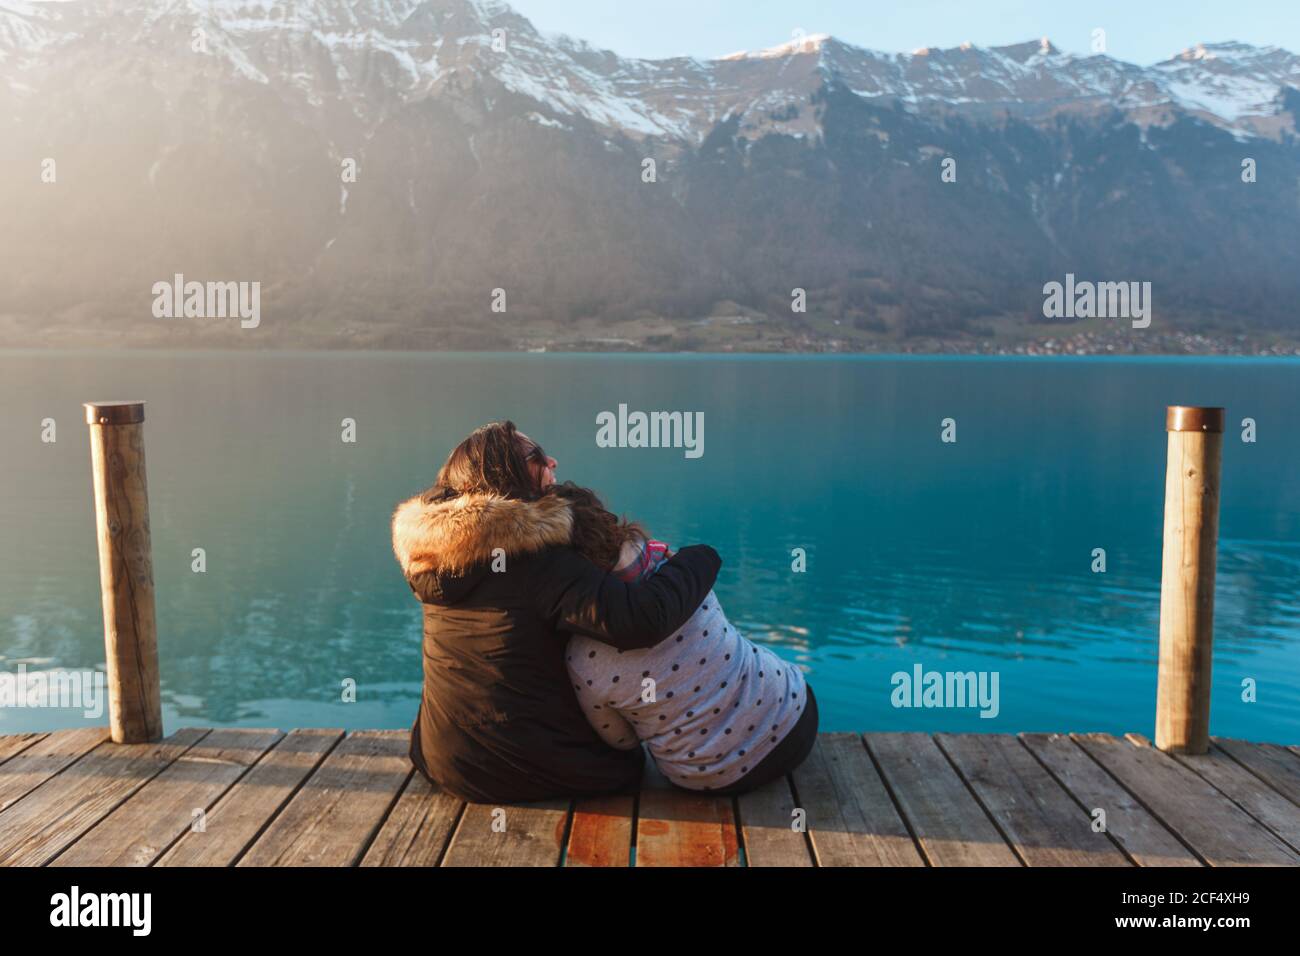 Back view of embracing women sitting on wood pier above turquoise lake in snowy mountains of Switzerland Stock Photo